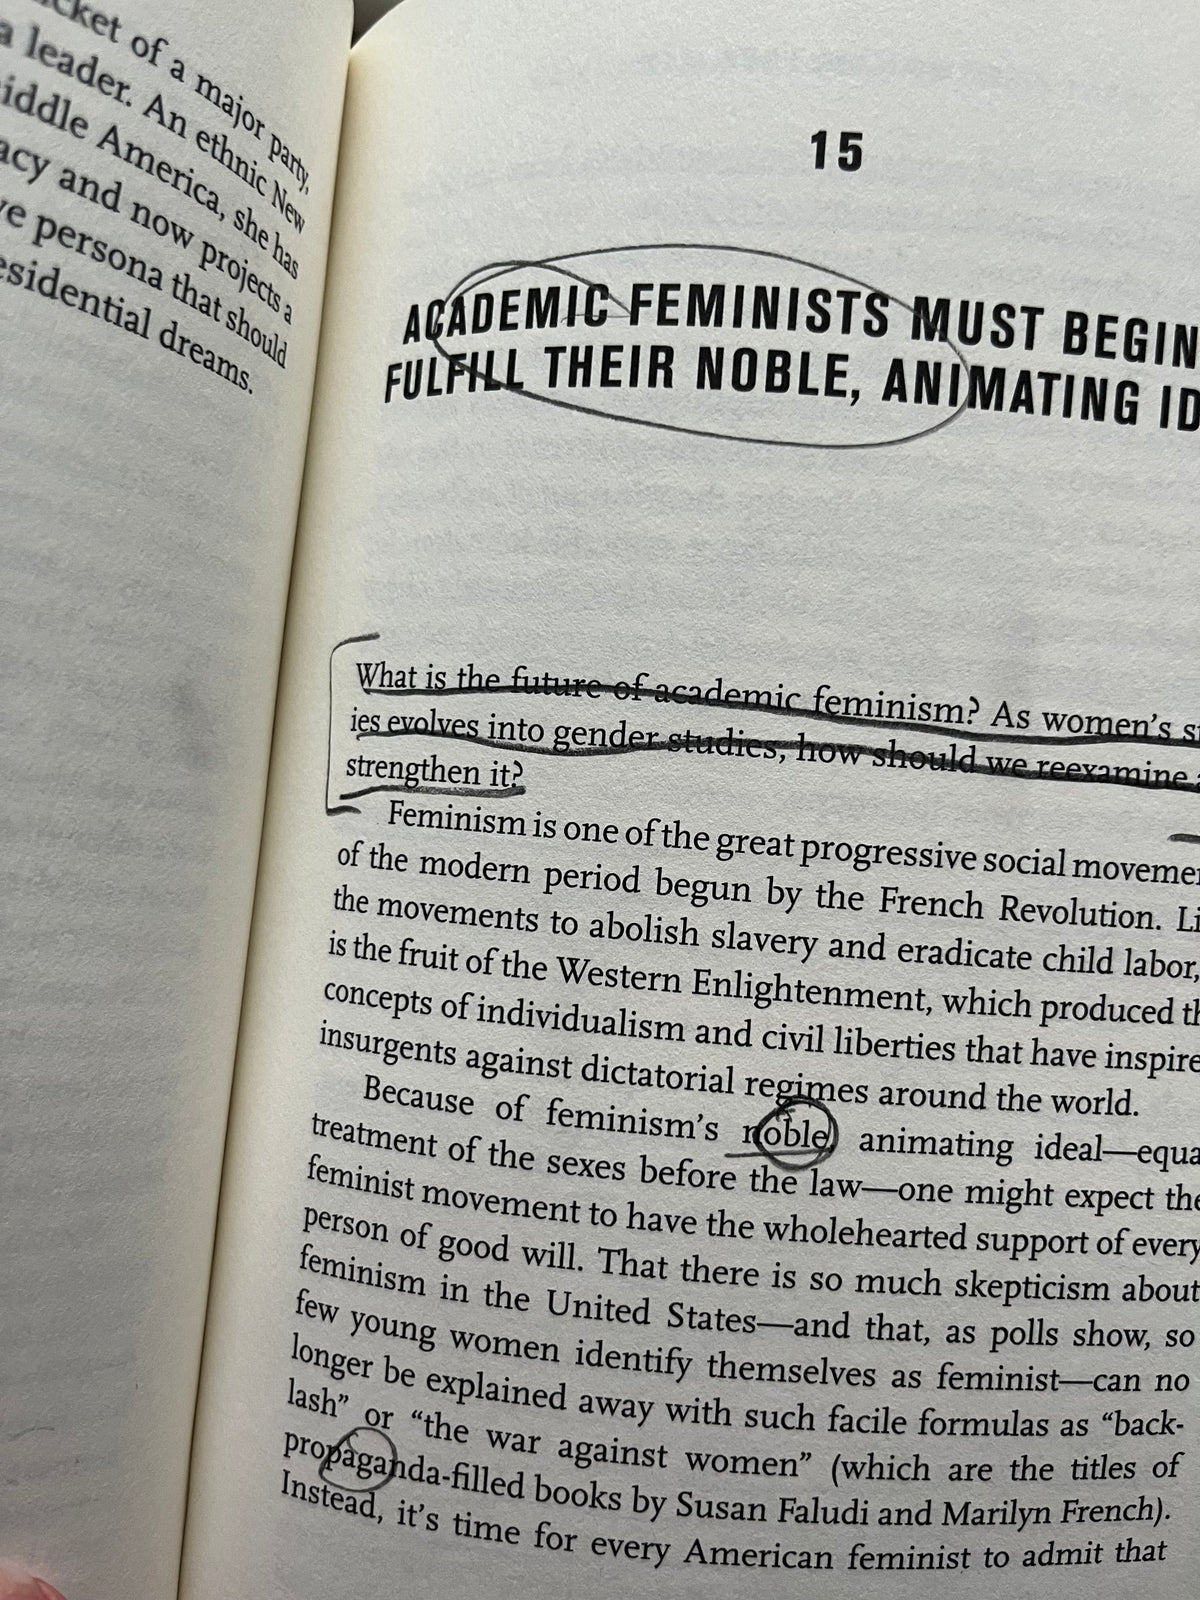 Free Women Free Men: Sex, Gender, Feminism by Camille Paglia